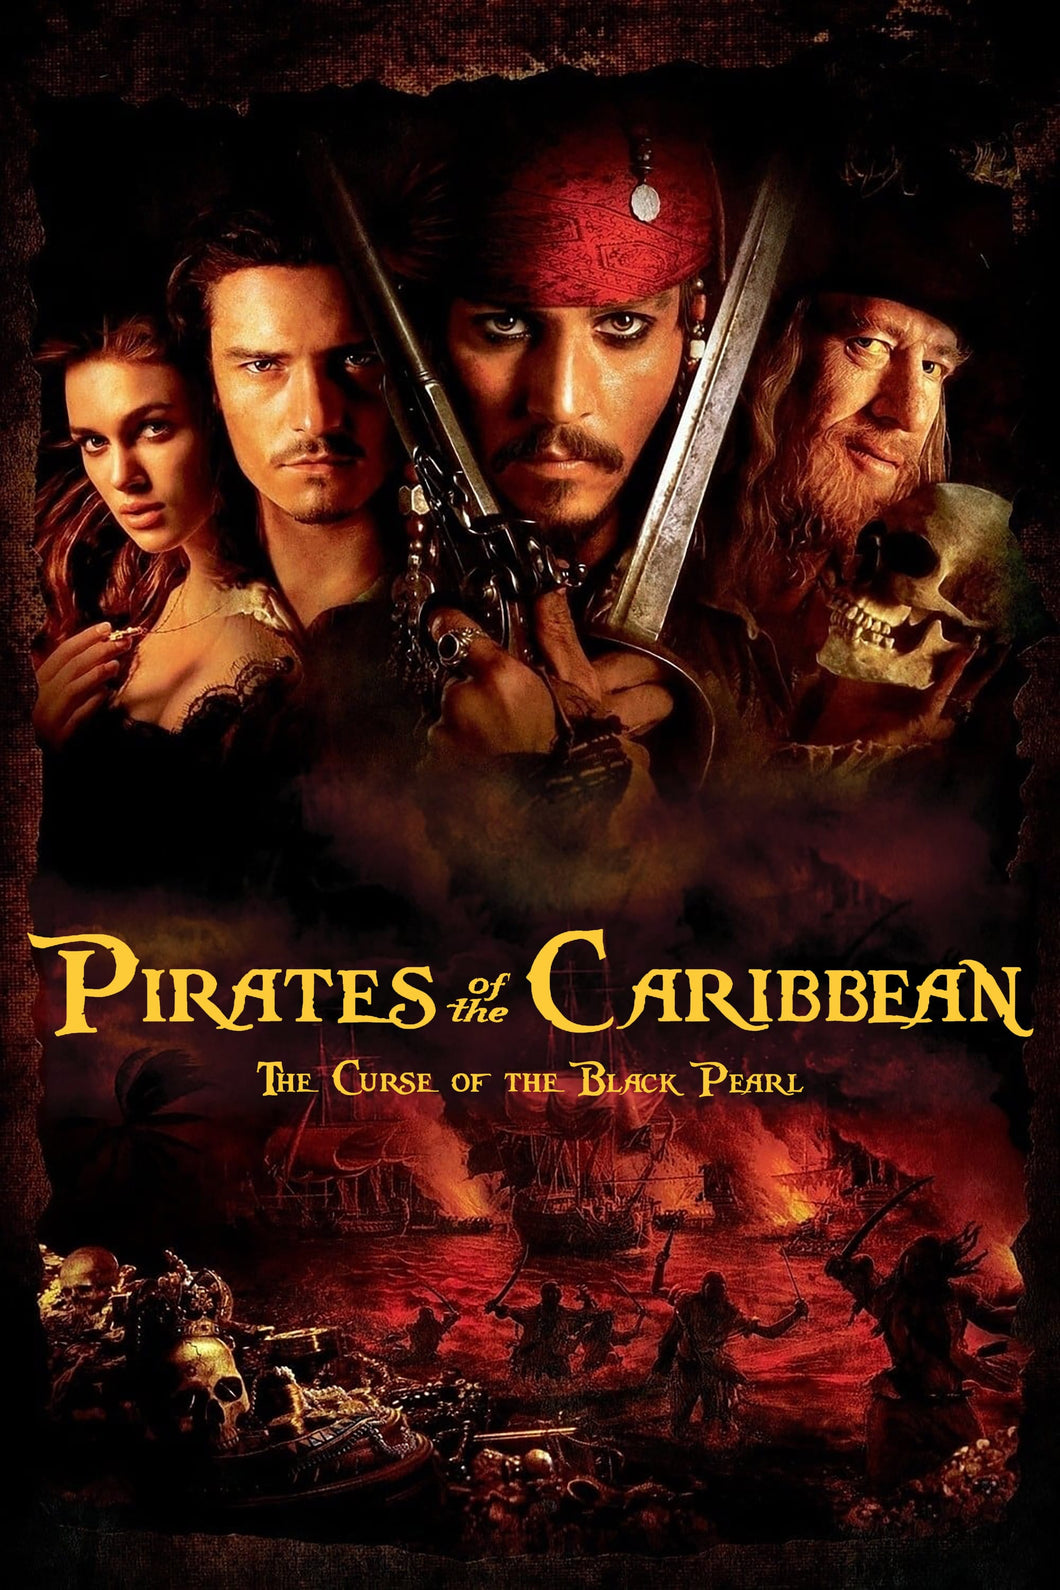 Pirates Of The Caribbean The Curse Of The Black Pearl (2003) Movie Poster Framed or Unframed Glossy Poster Free UK Shipping!!!